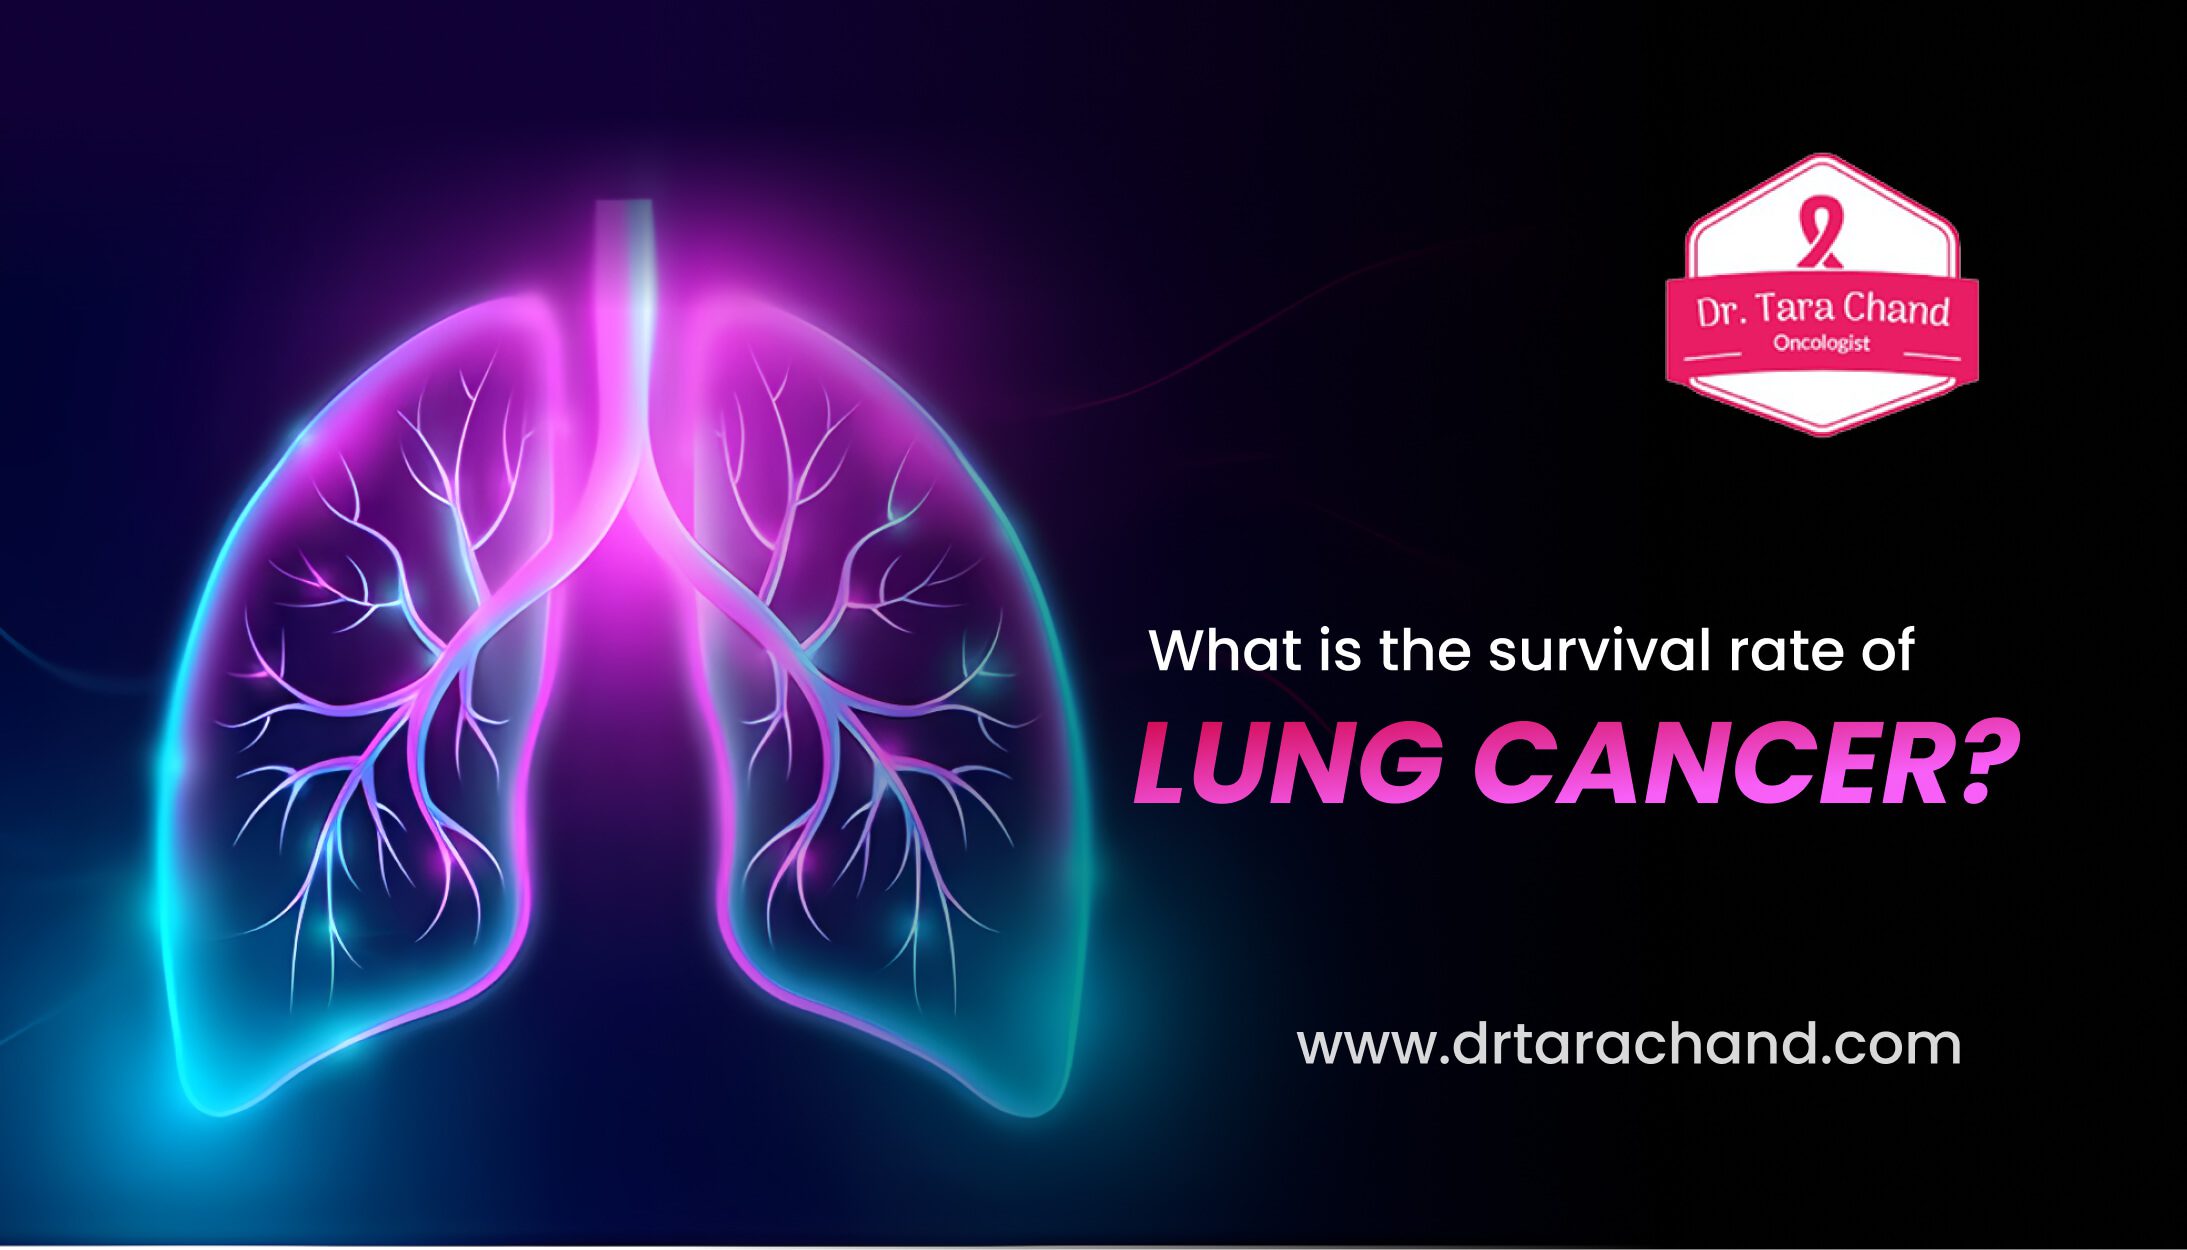 What is the survival rate of lung cancer?